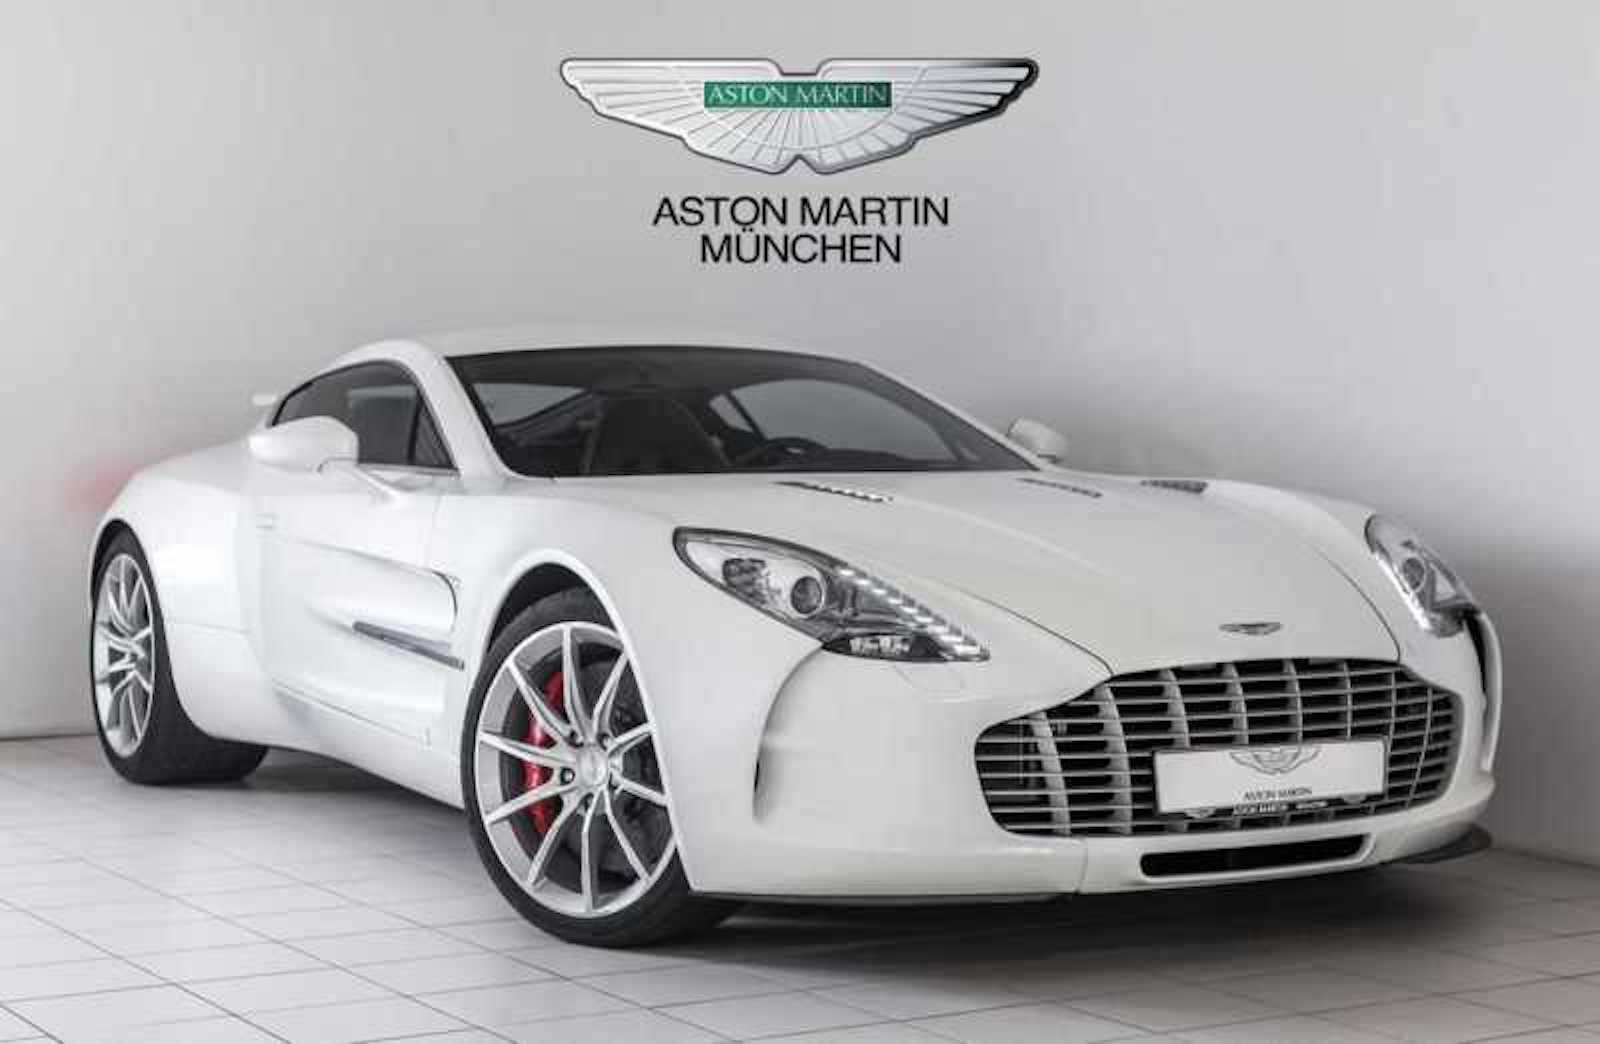 HQ Aston Martin One-77 Wallpapers | File 85.72Kb